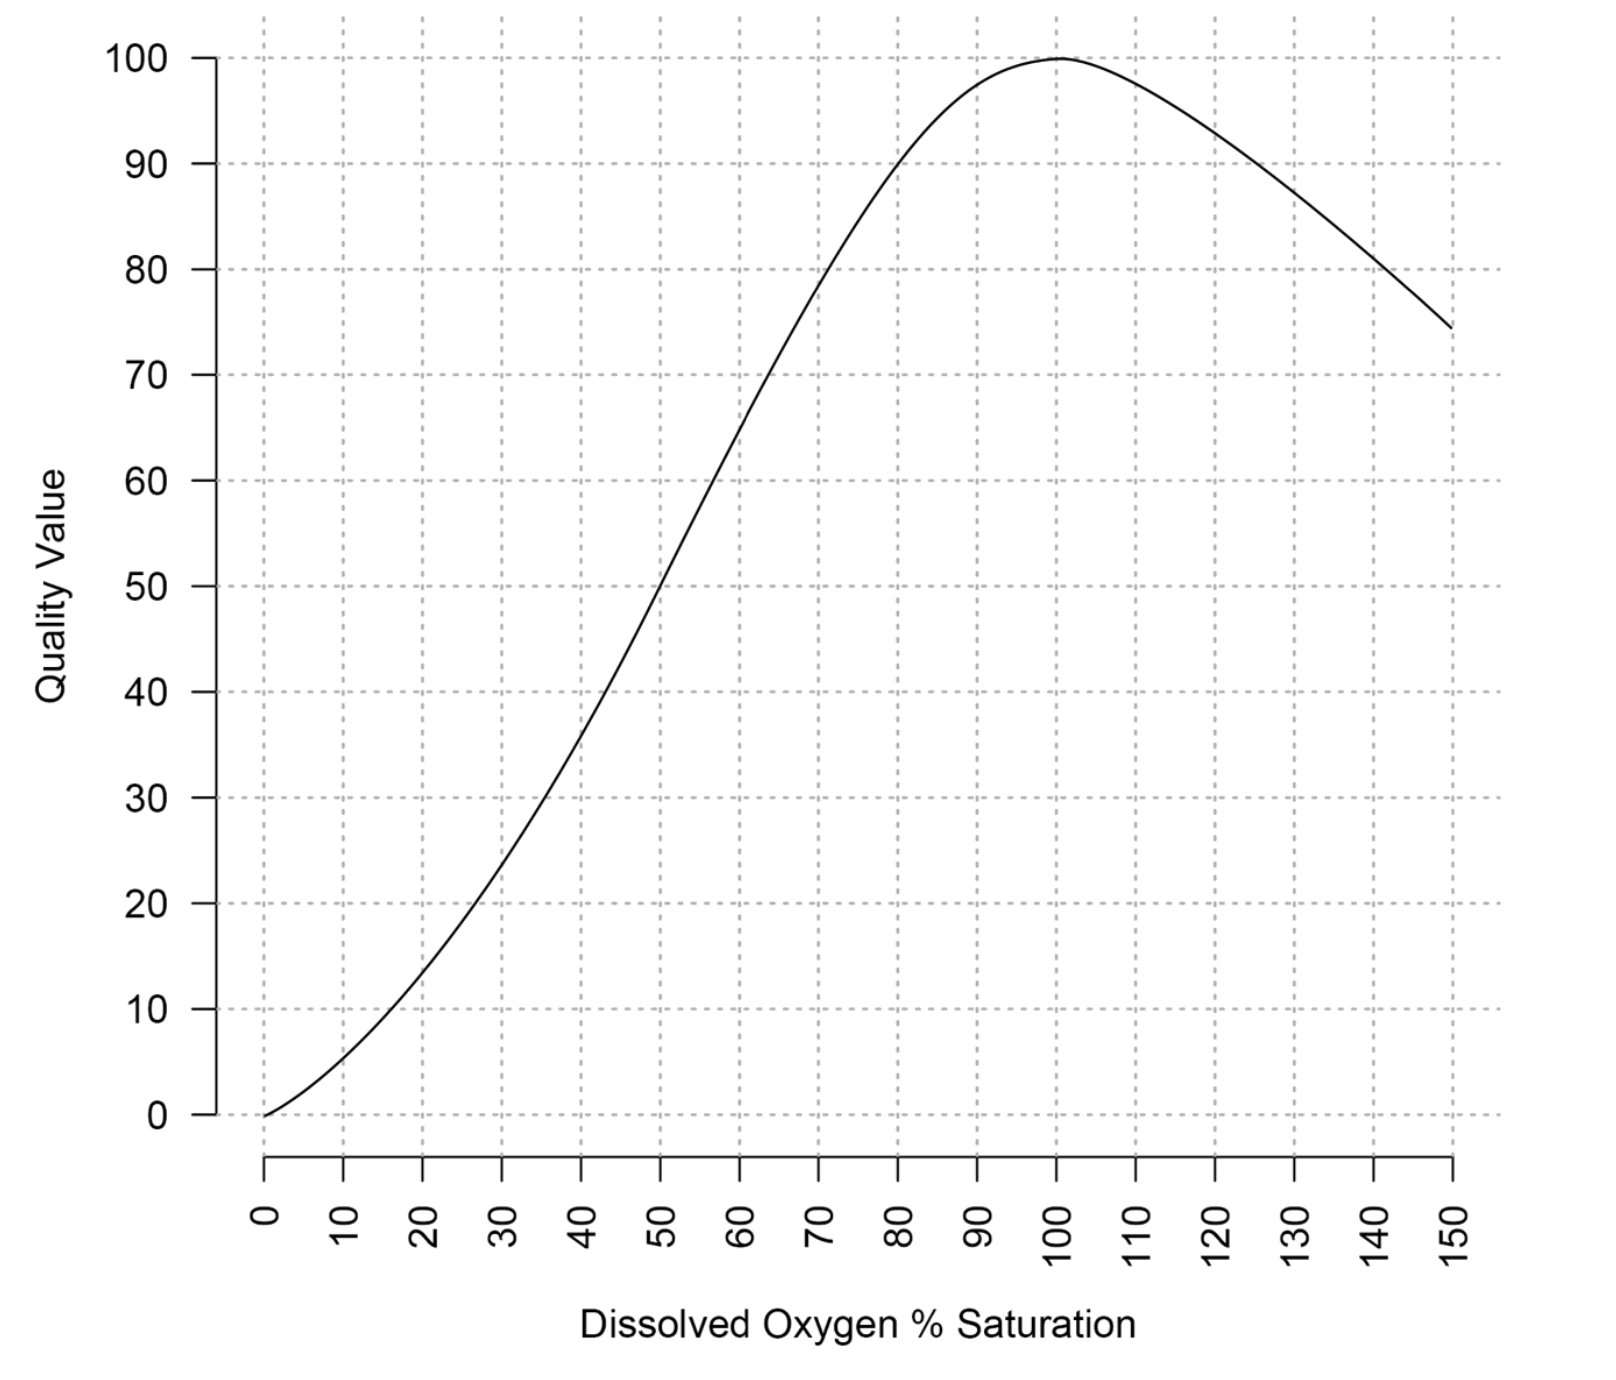 Dissolved oxygen percent saturation quality values.